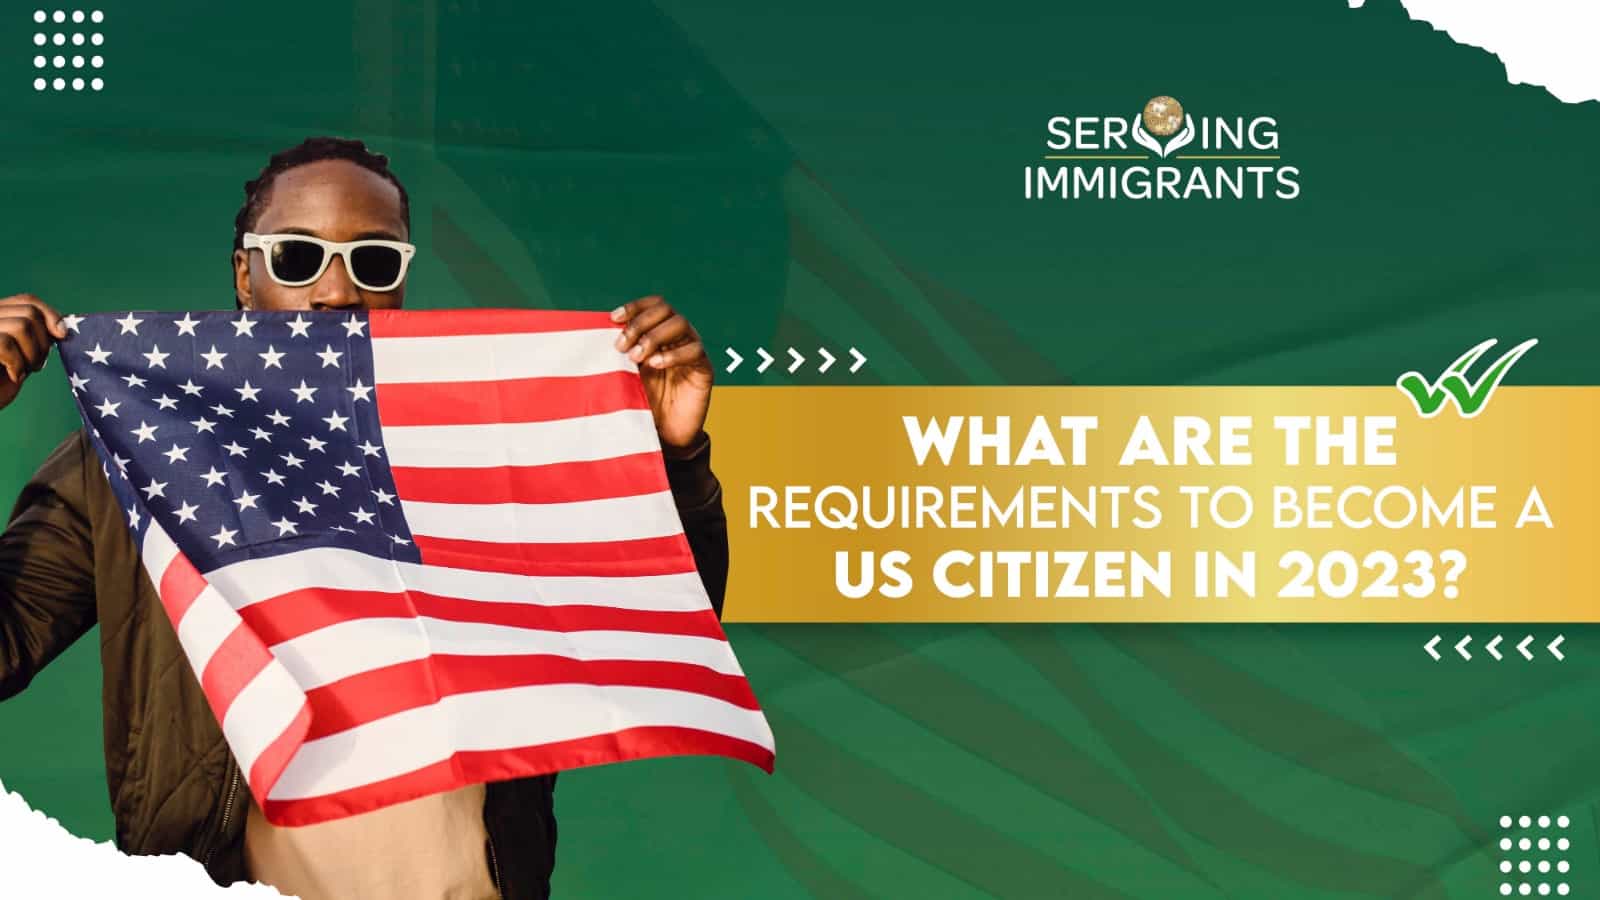 What Are The Requirements To Become A U.S. Citizen In 2023?